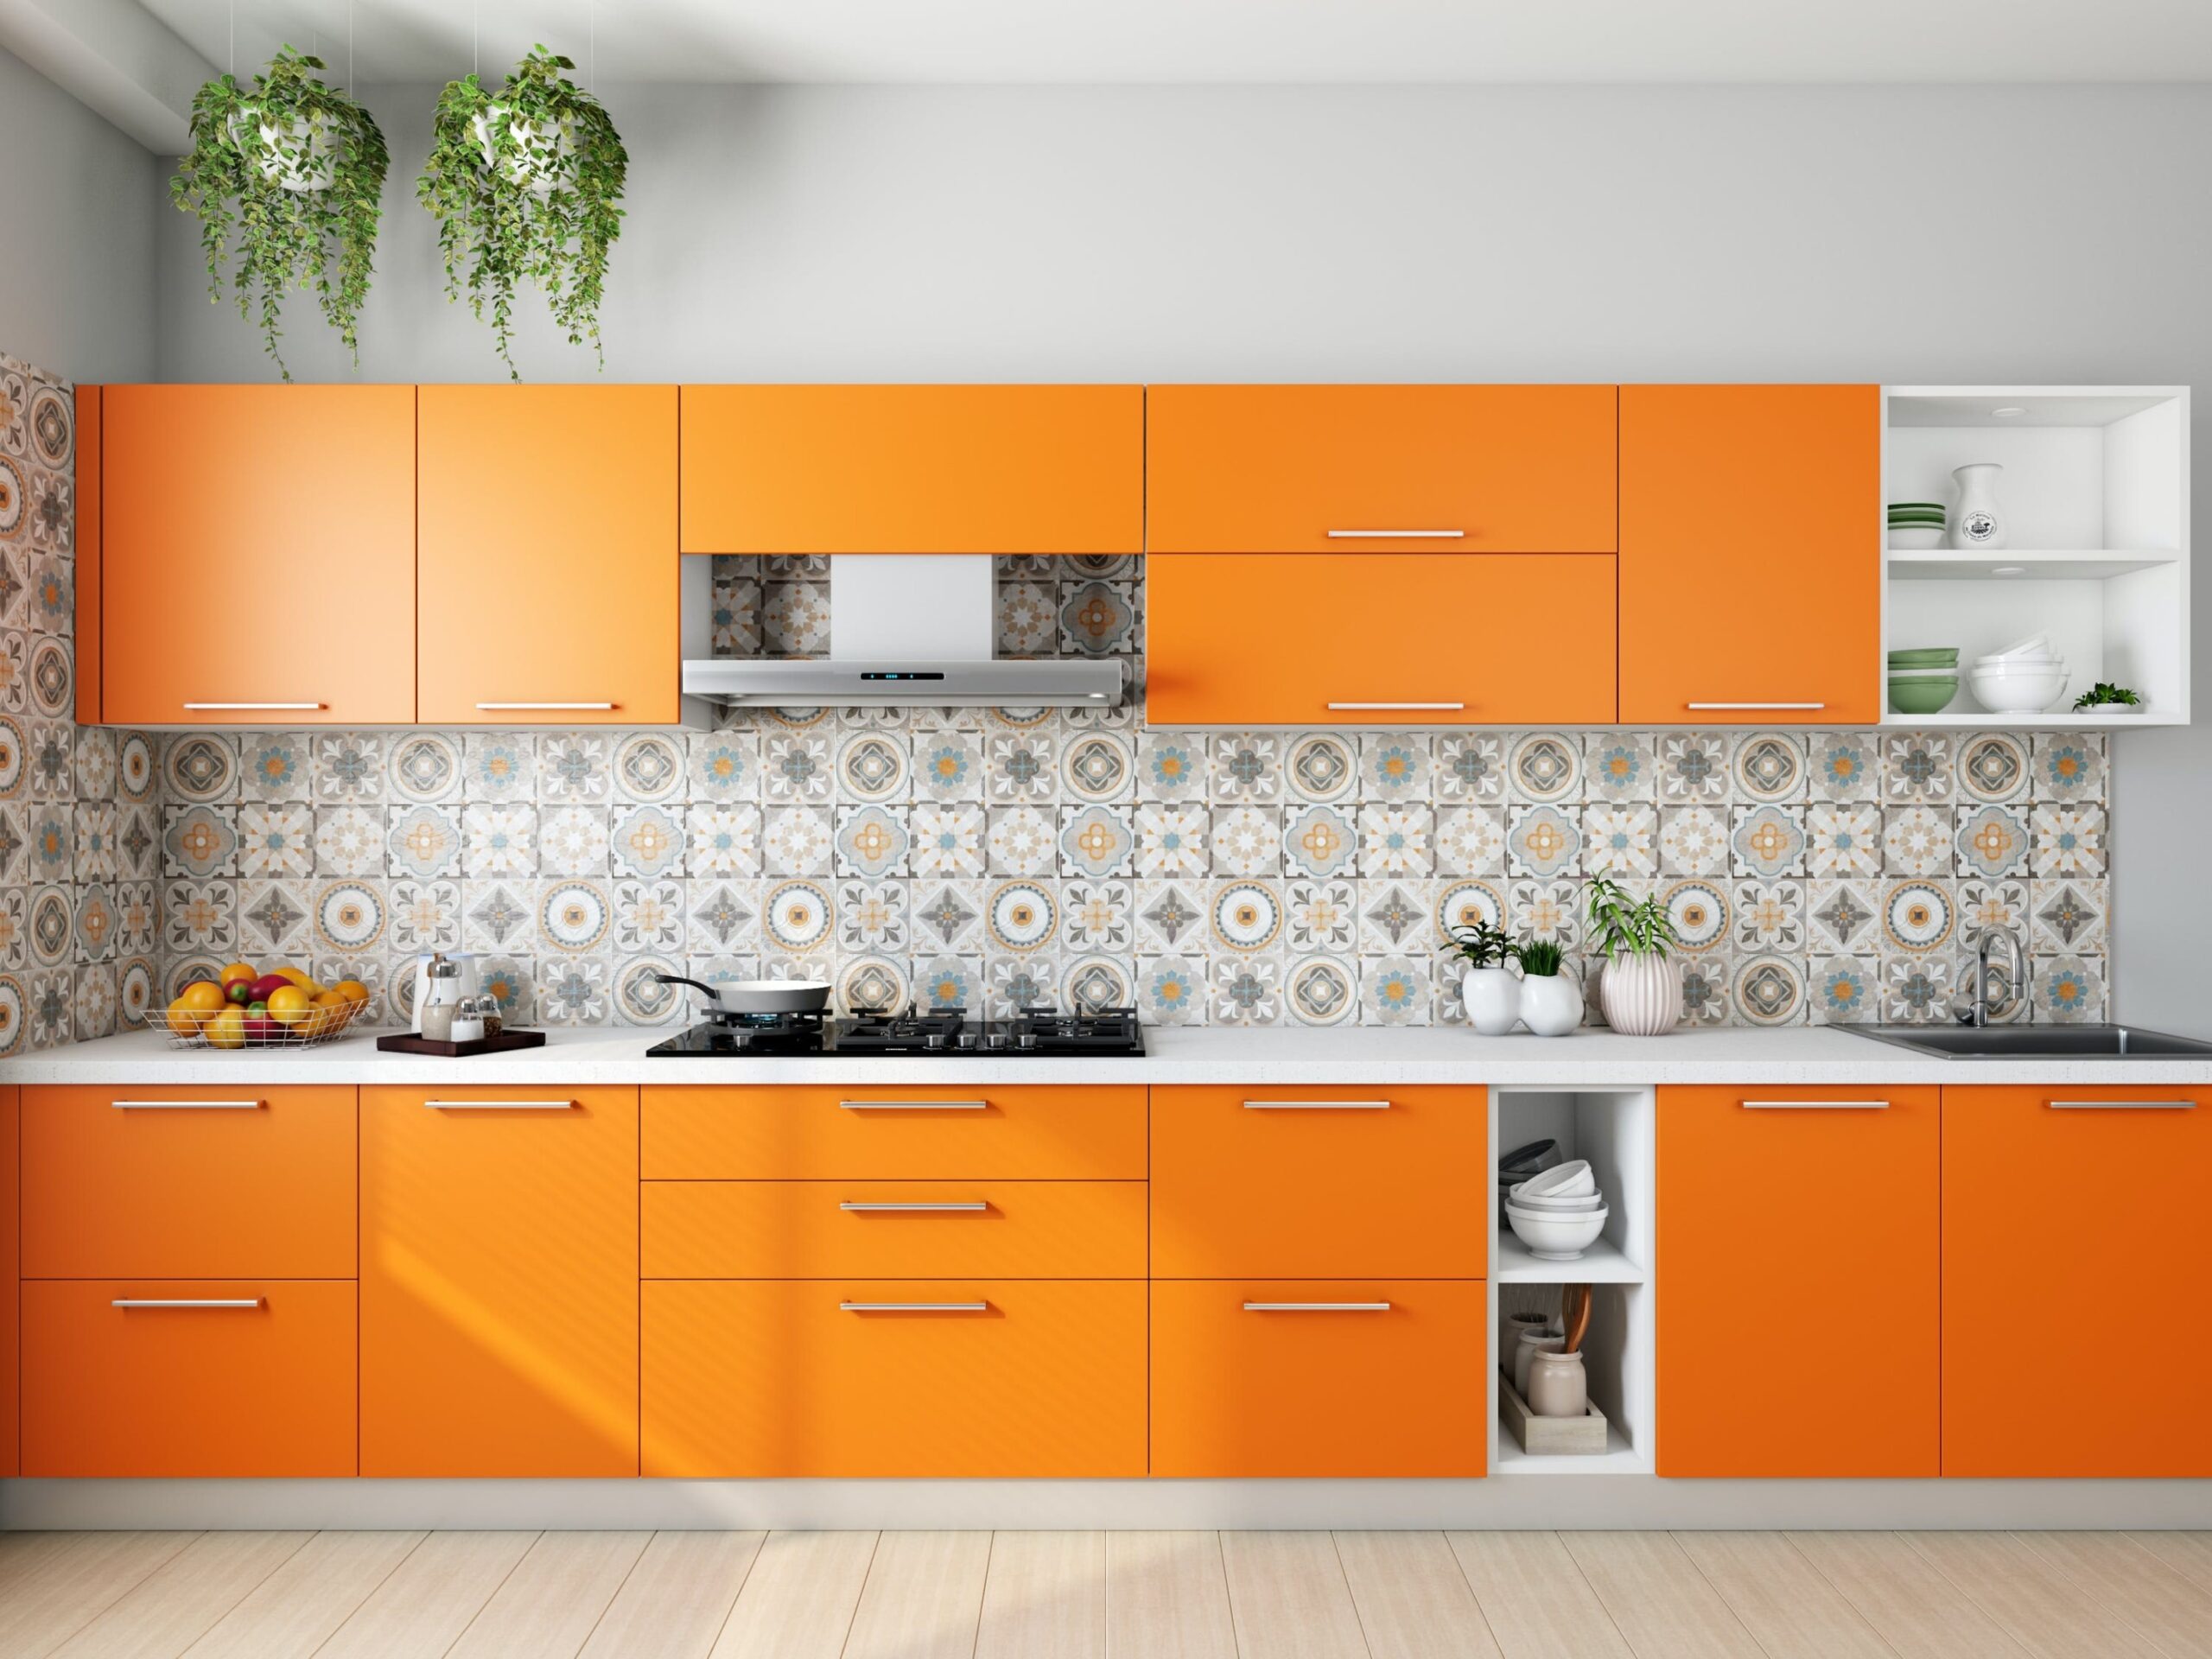 6 things to consider when designing a modular kitchen  - which material is good for modular kitchen?